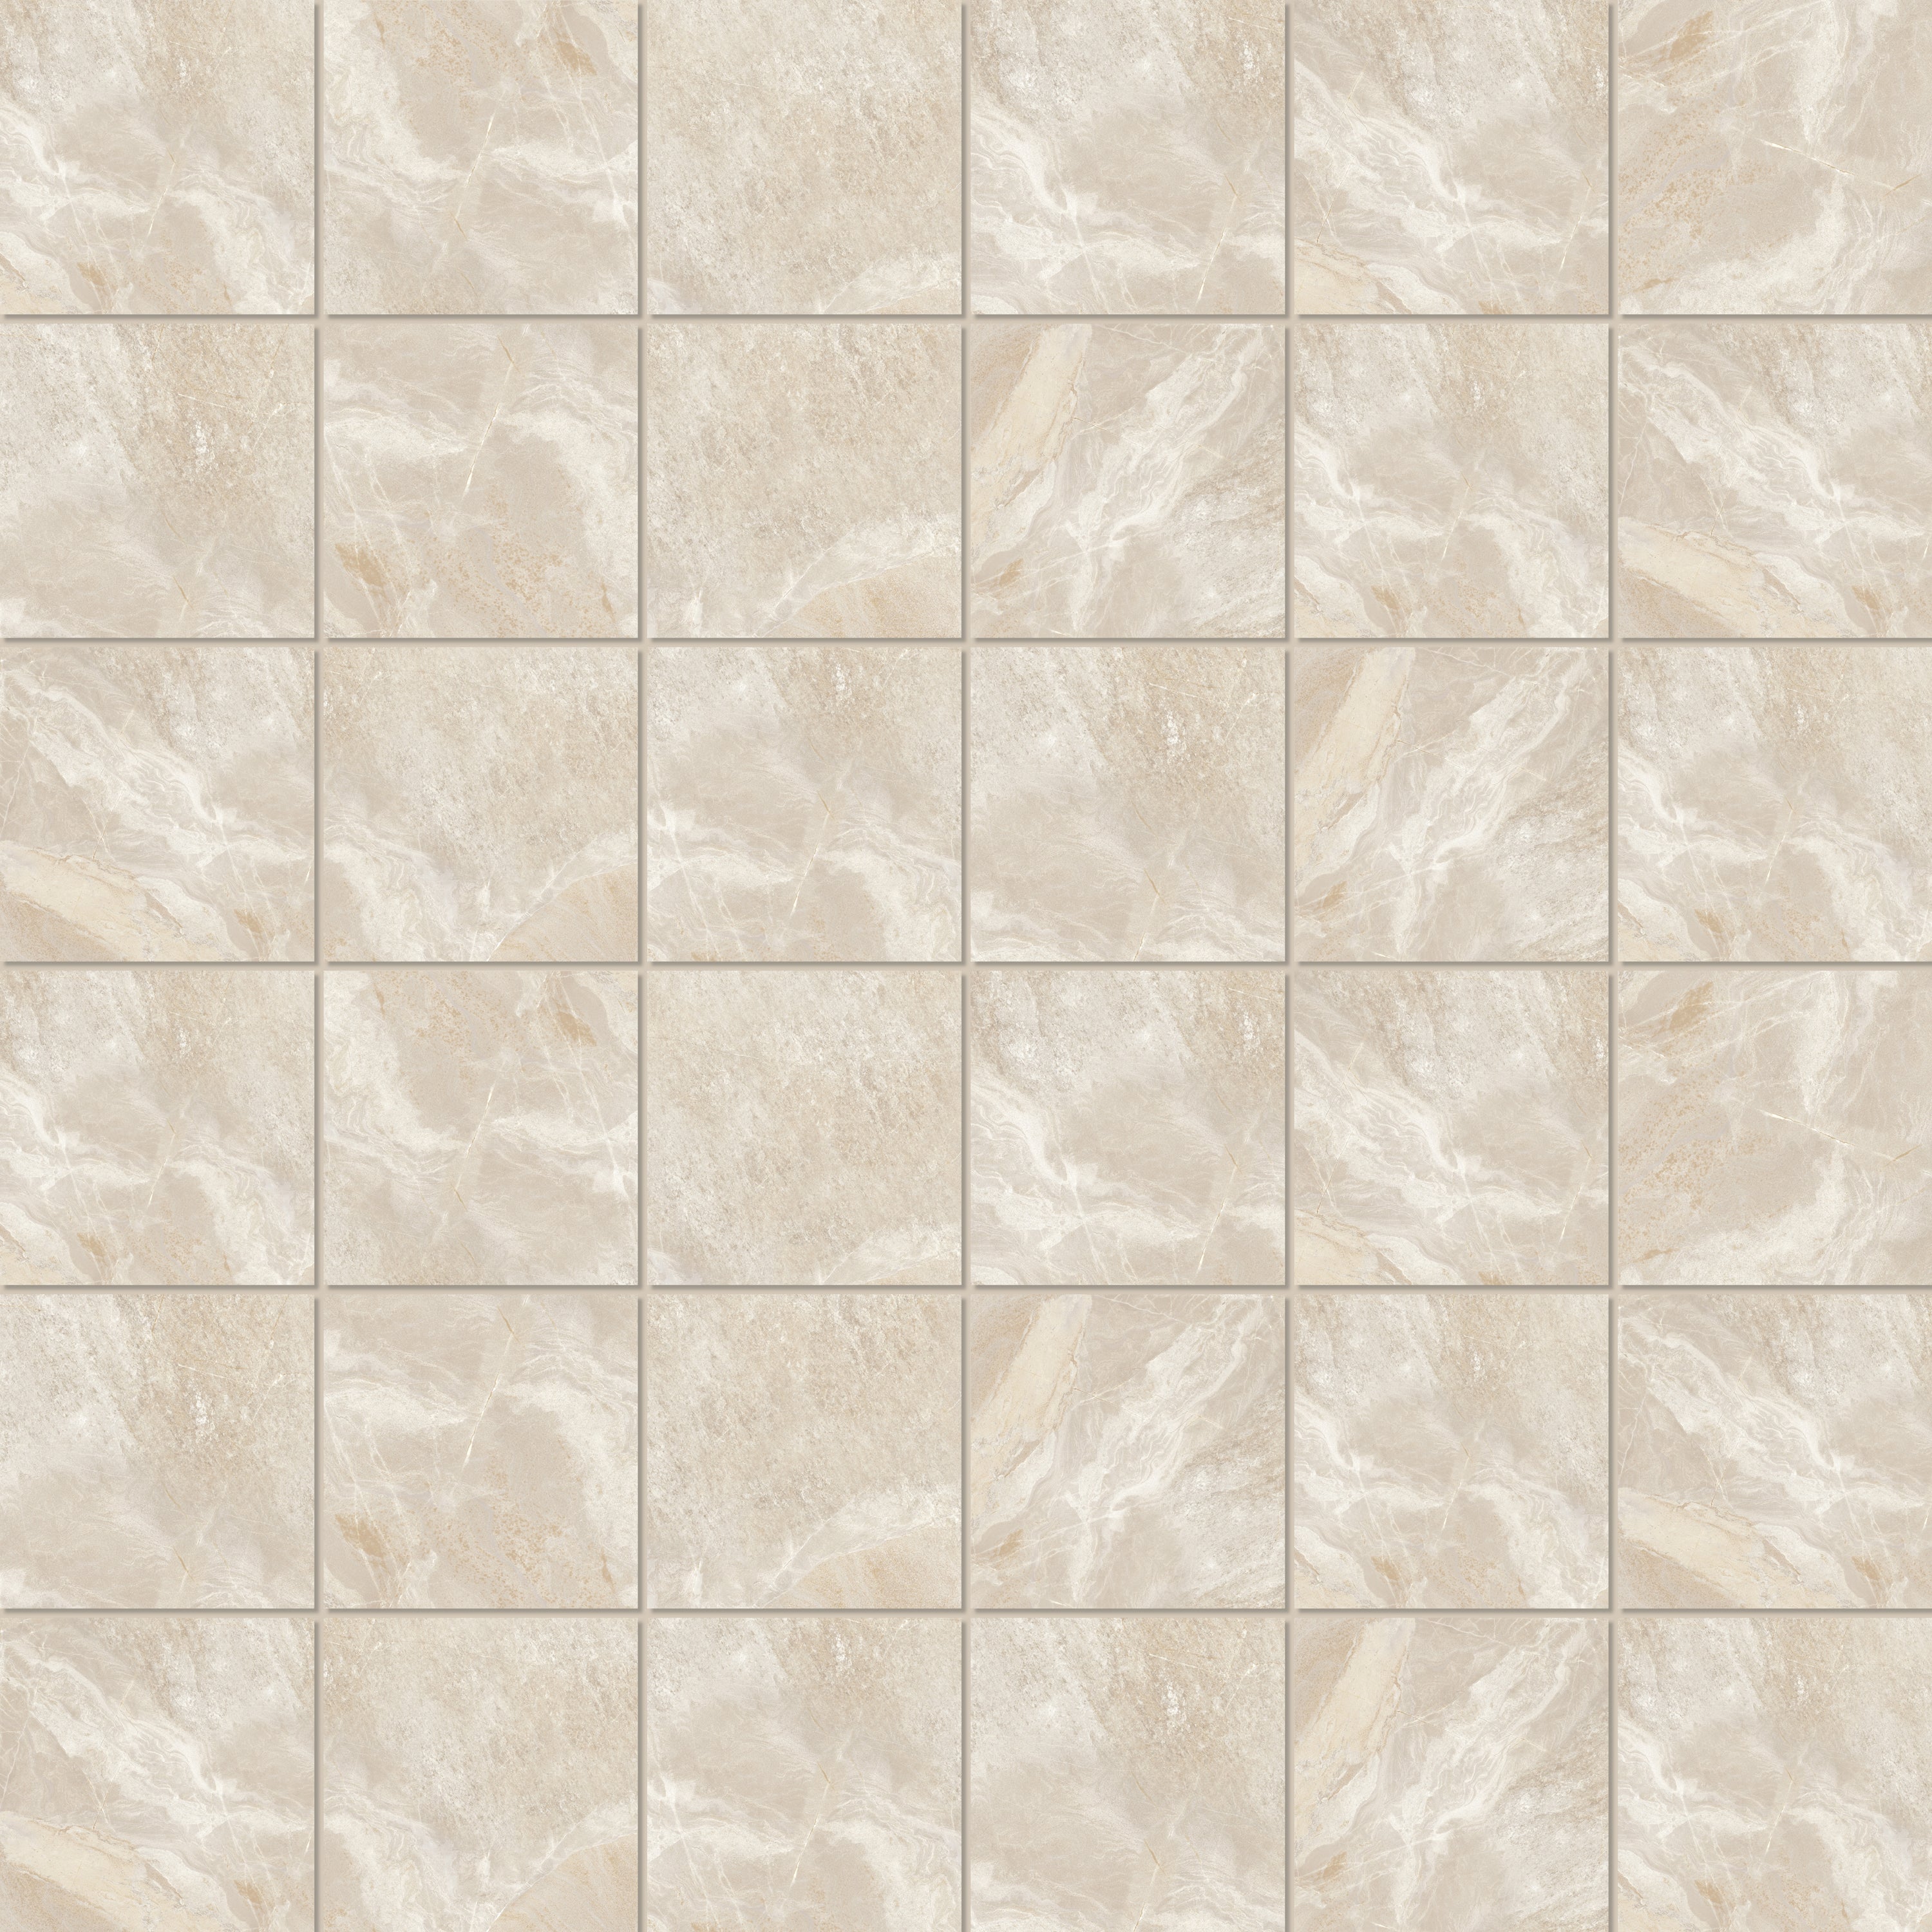 landmark contract barcelona gold straight stack 2x2 mosaic 12x12x8mm matte pressed porcelain tile distributed by surface group international